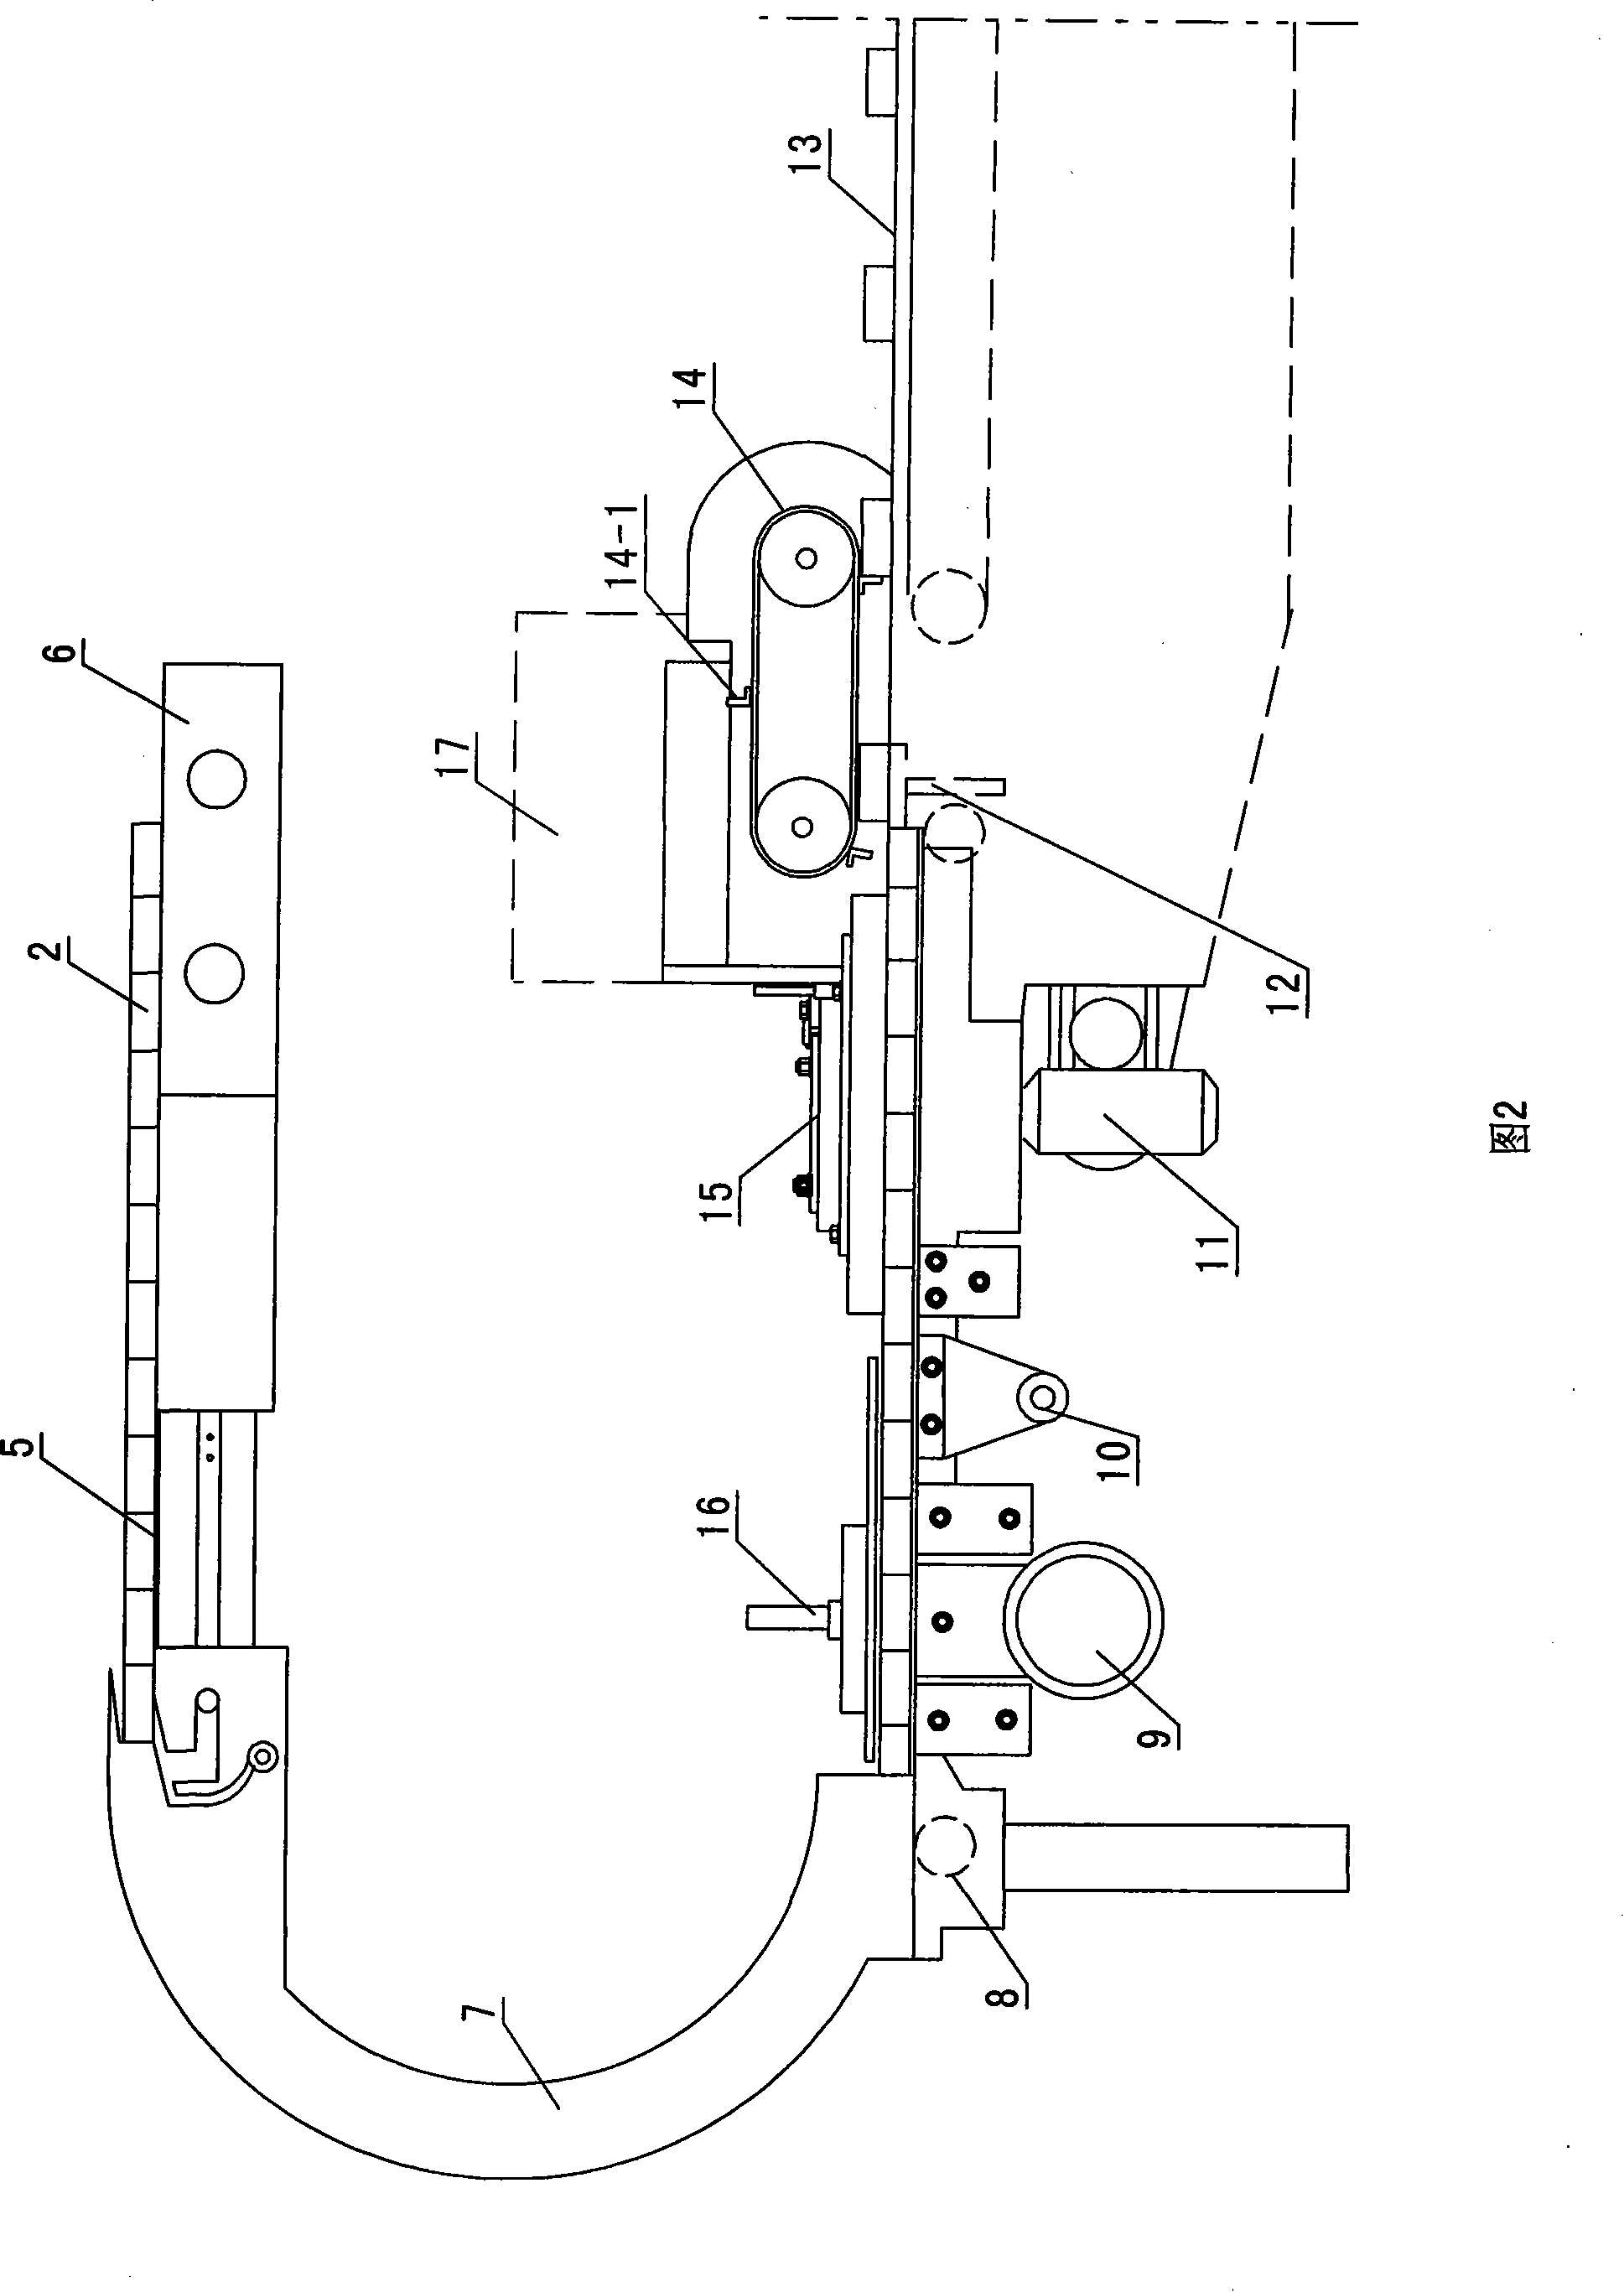 Auxiliary packing machine for cigarette packet transparent paper and cigarette packet conveying system thereof